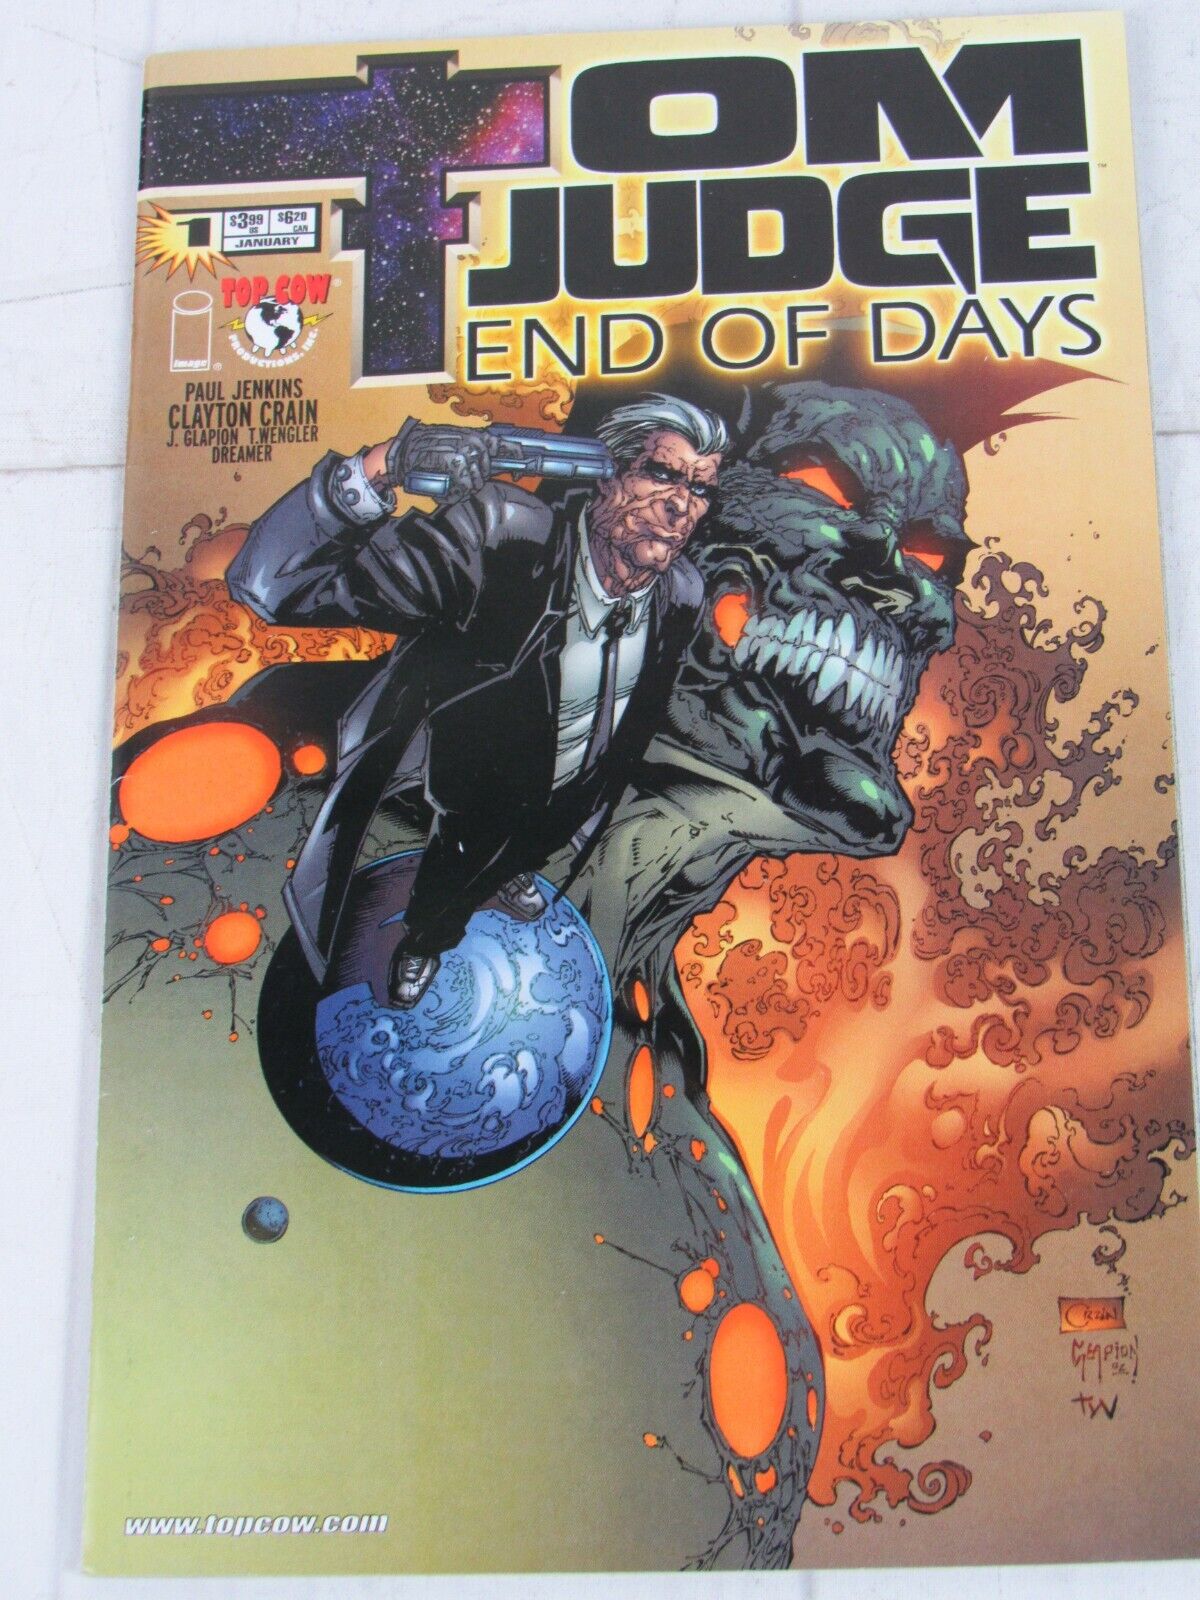 Tom Judge: End of Days #1 Jan. 2003 Top Cow Productions